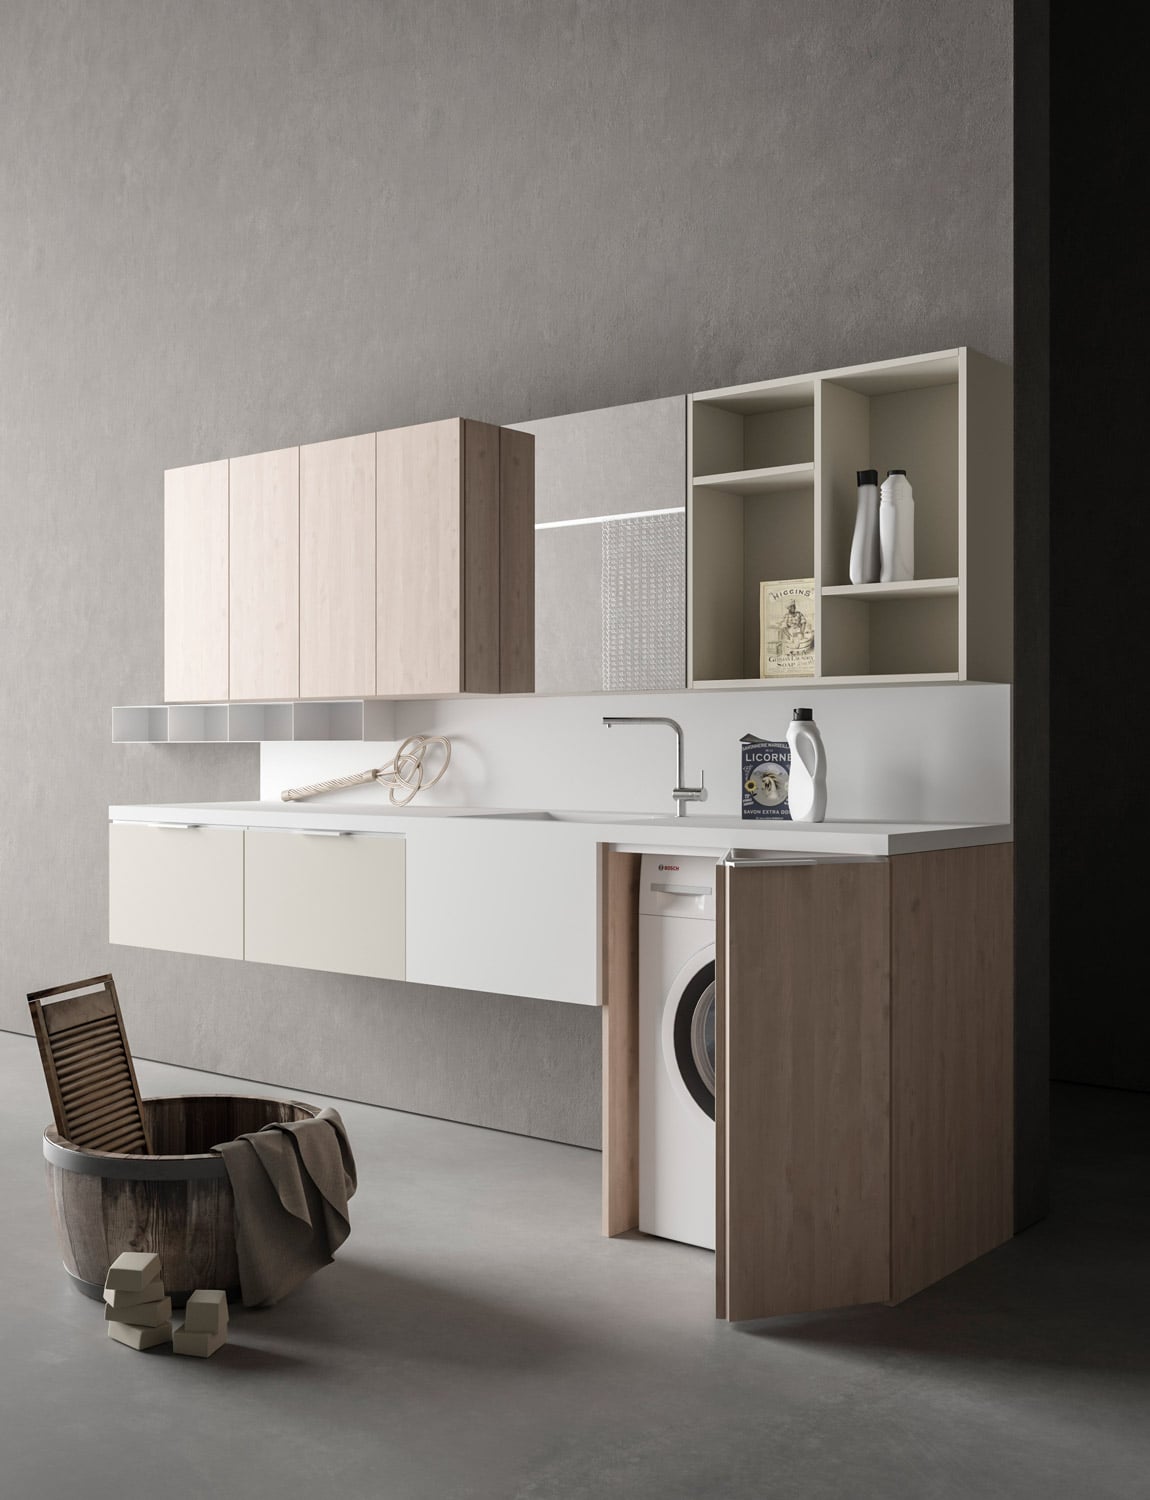 Melamine and Sabbia matte lacquer cabinets with washbasin and top in White matte Teknorit.